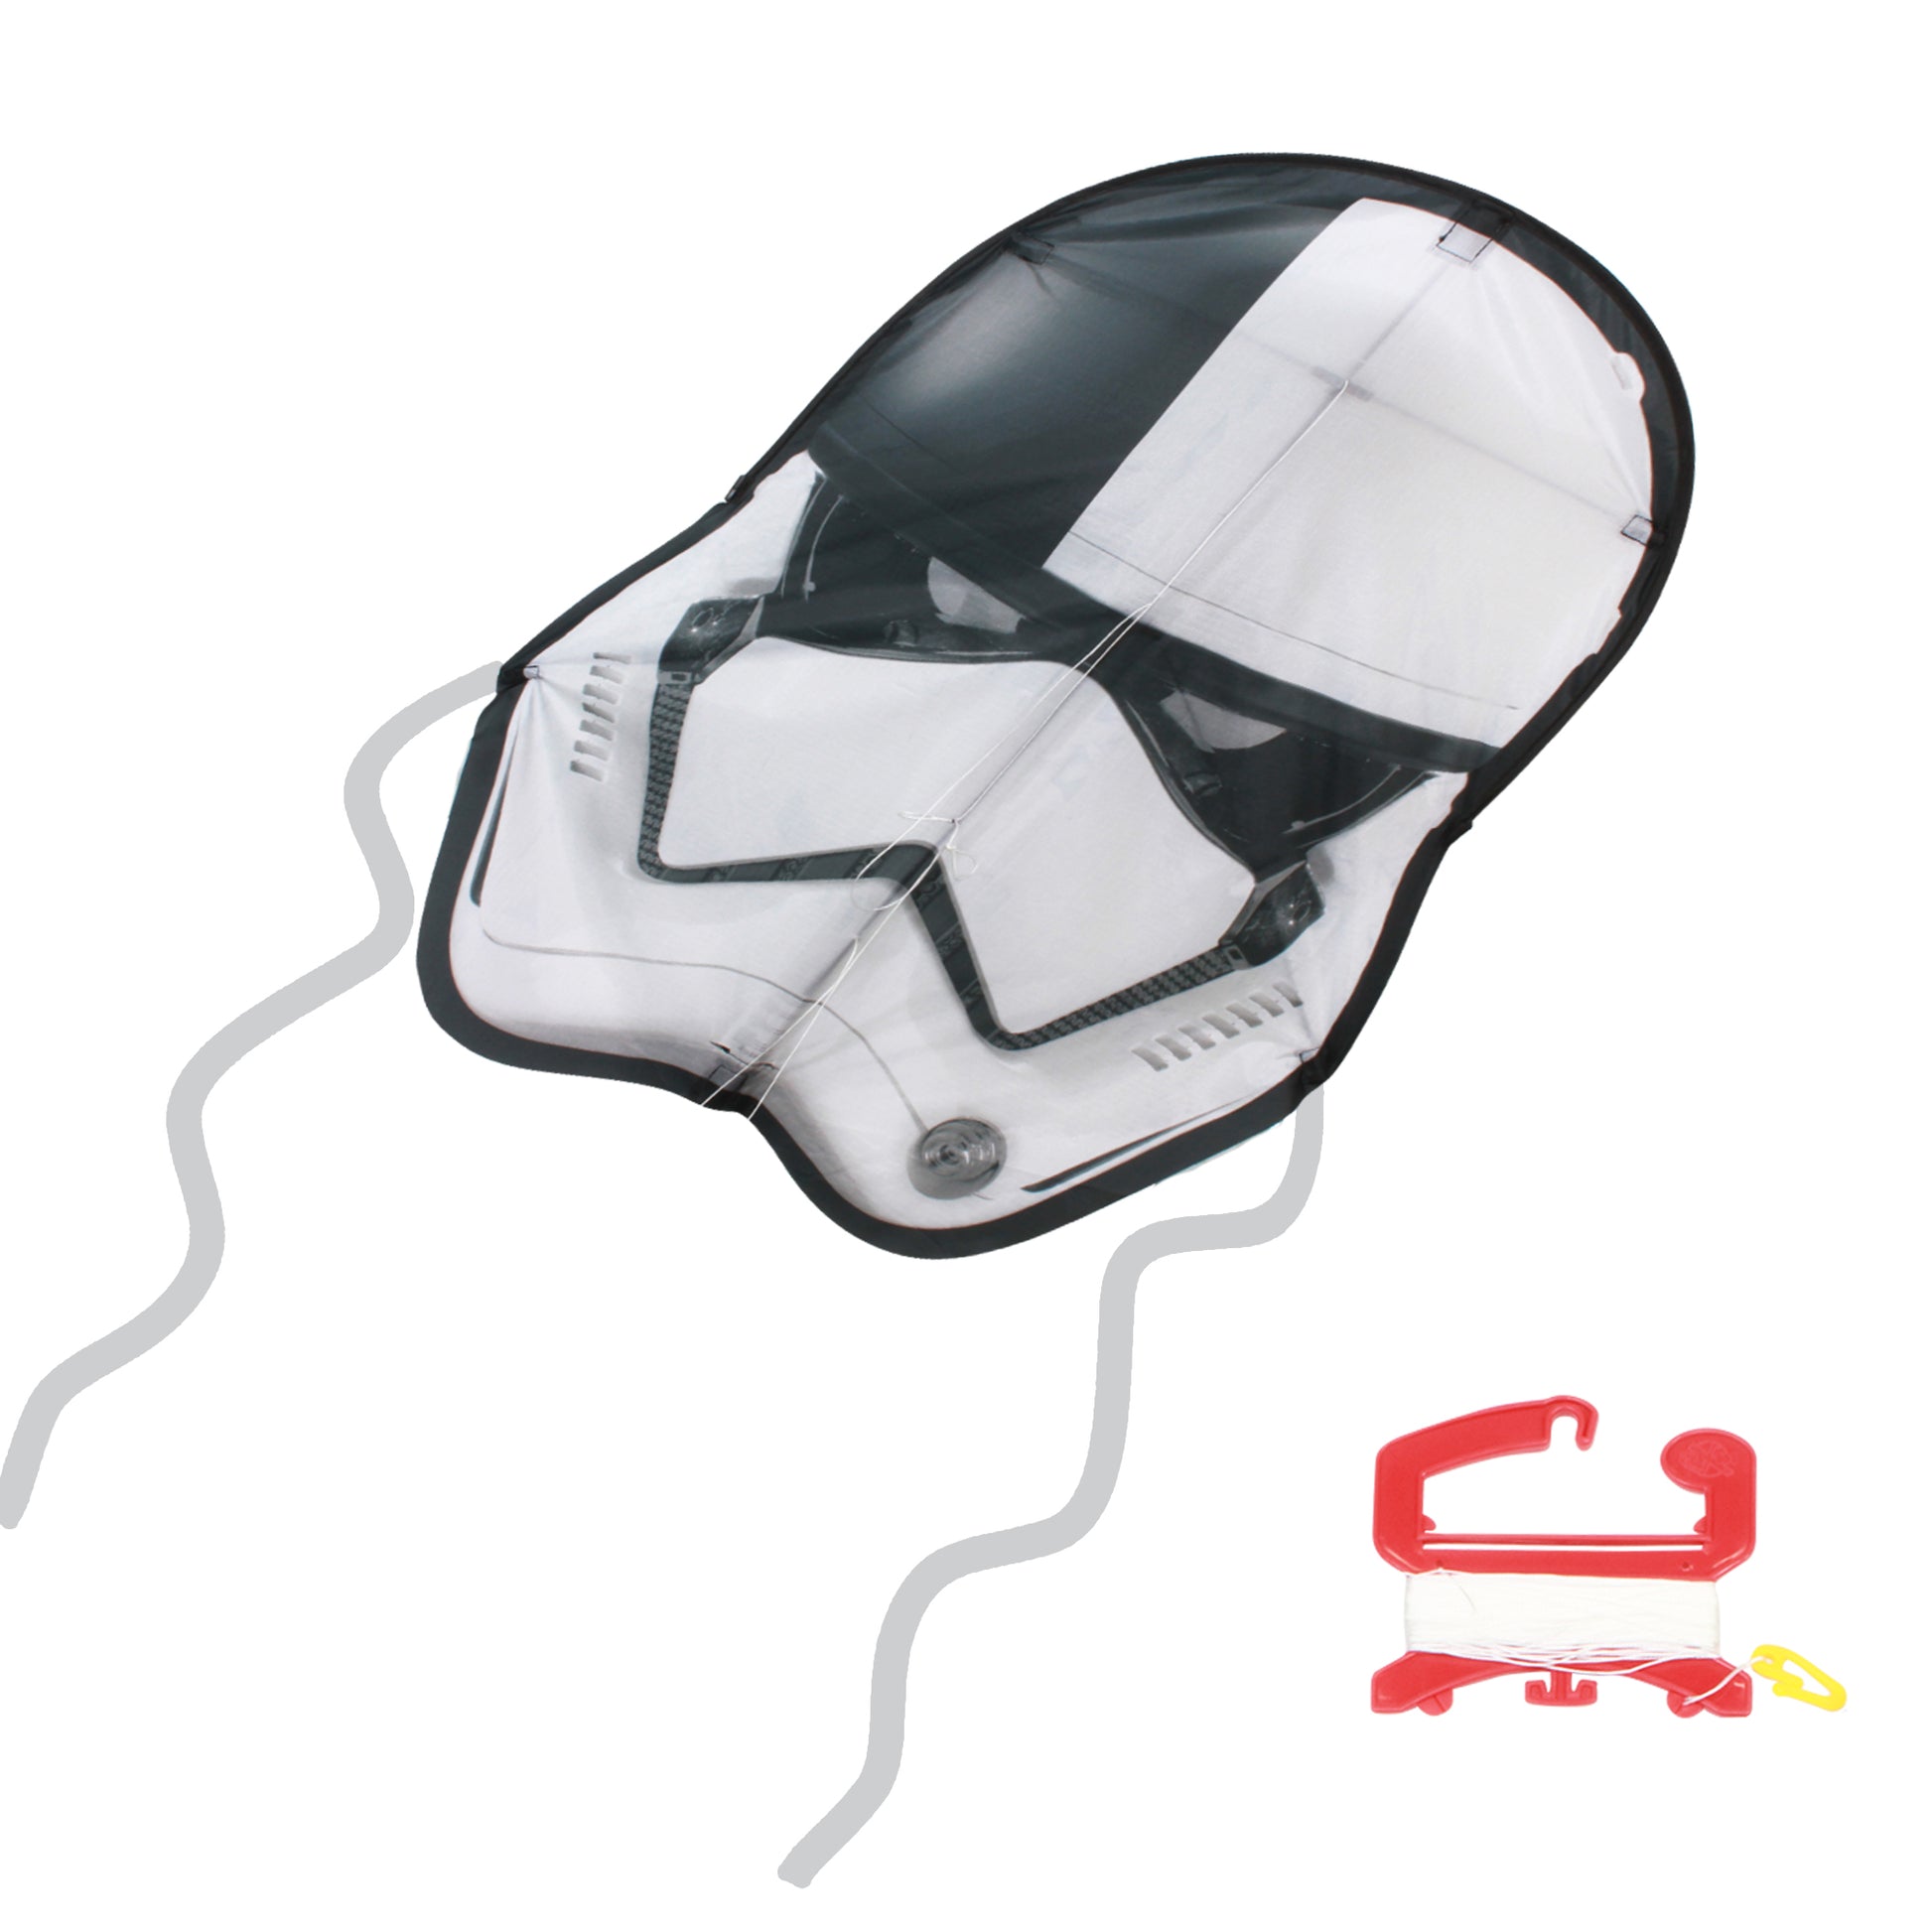 X Kites Face Kite Star Wars The Last Jedi First Order Stormtrooper Executioner DLX Nylon Kite photo showing handle